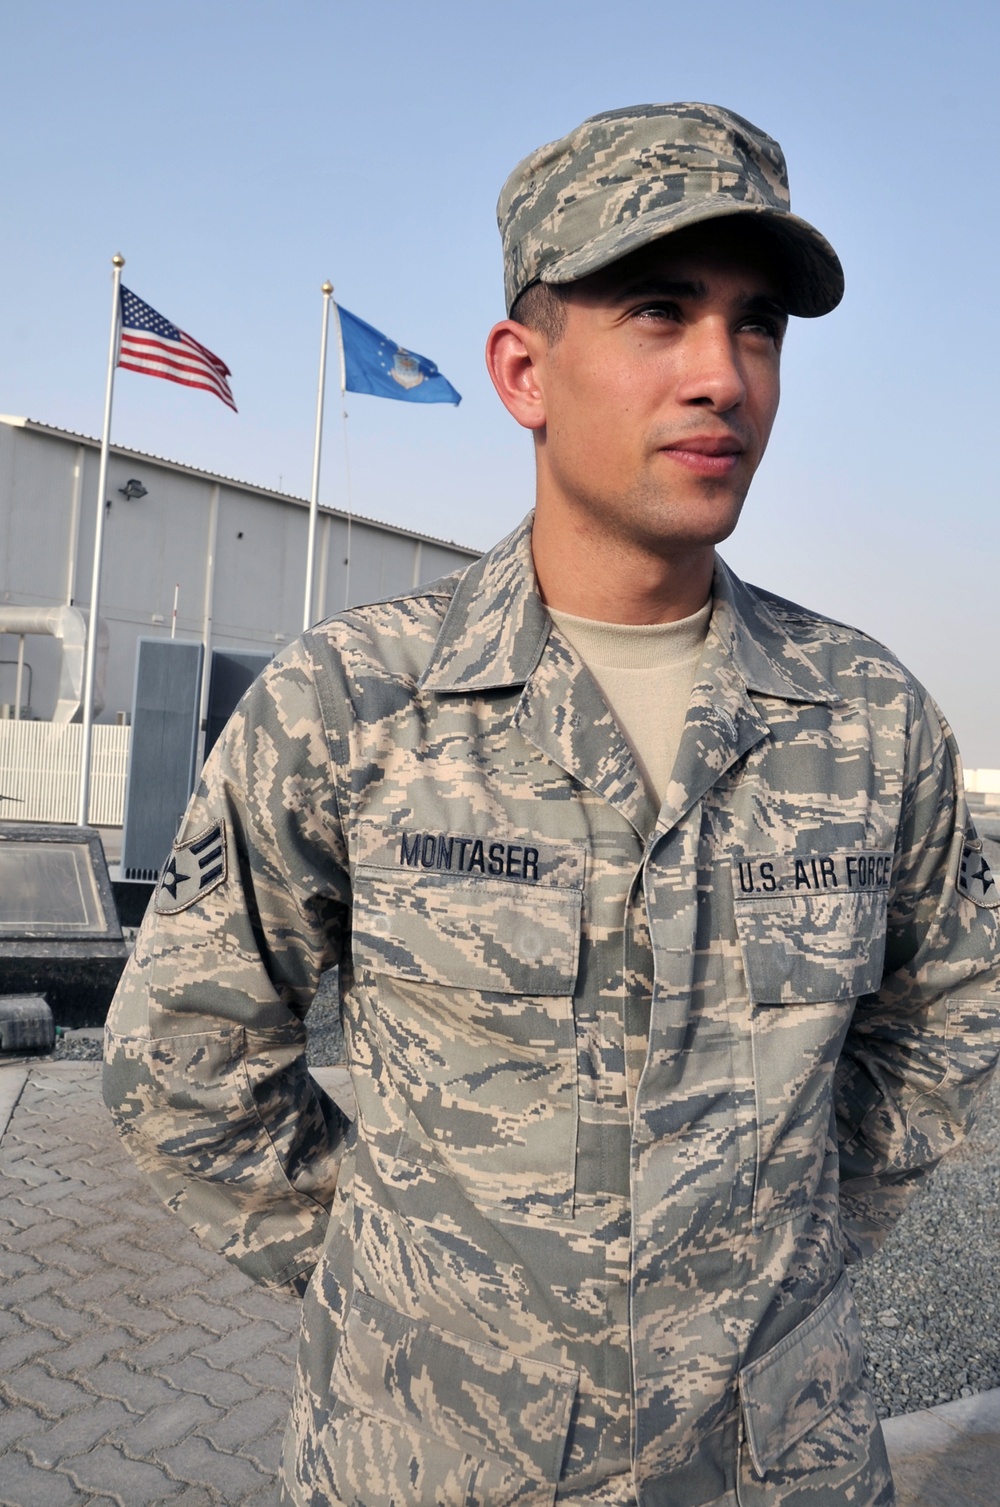 NYPD Blue to the ABU: Deployed New Jersey Guard Senior Airman Speaks of Service, Sacrifice